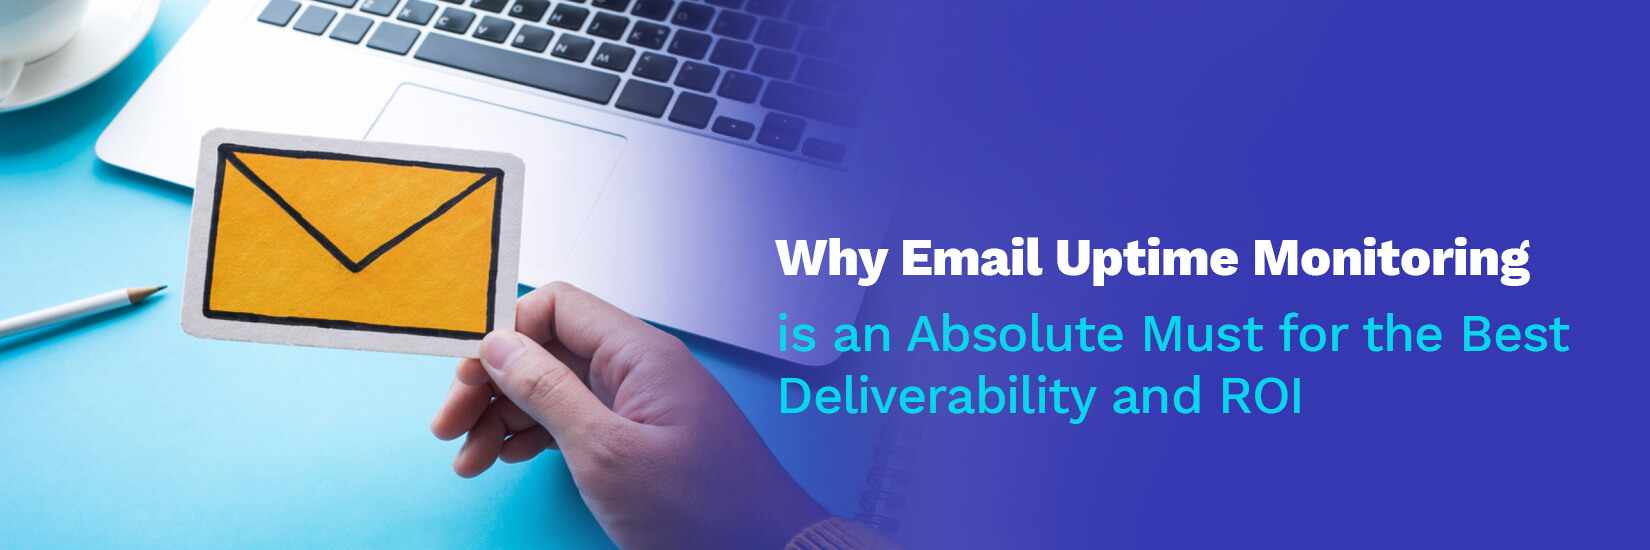 Why Email Uptime Monitoring is an Absolute Must for the Best Deliverability and ROI